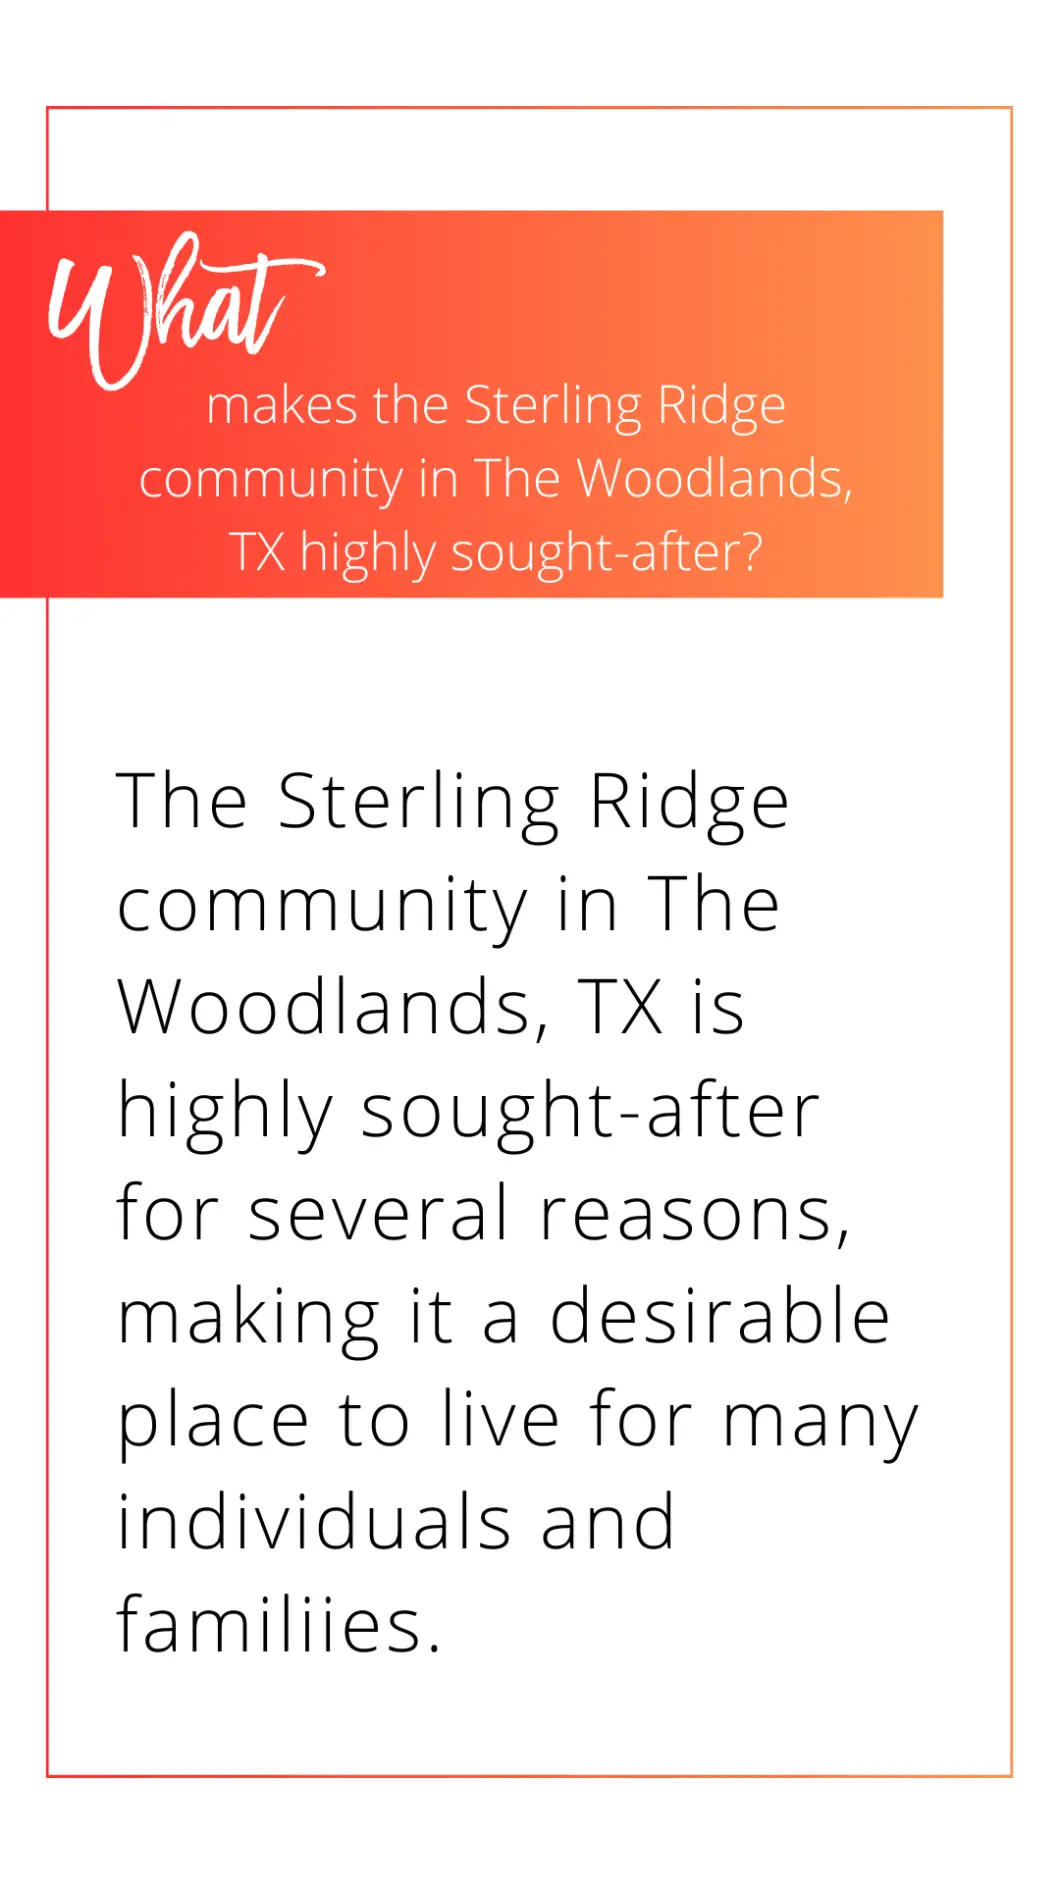 What makes the Sterling Ridge community in The Woodlands TX highly sought after 1060x1884